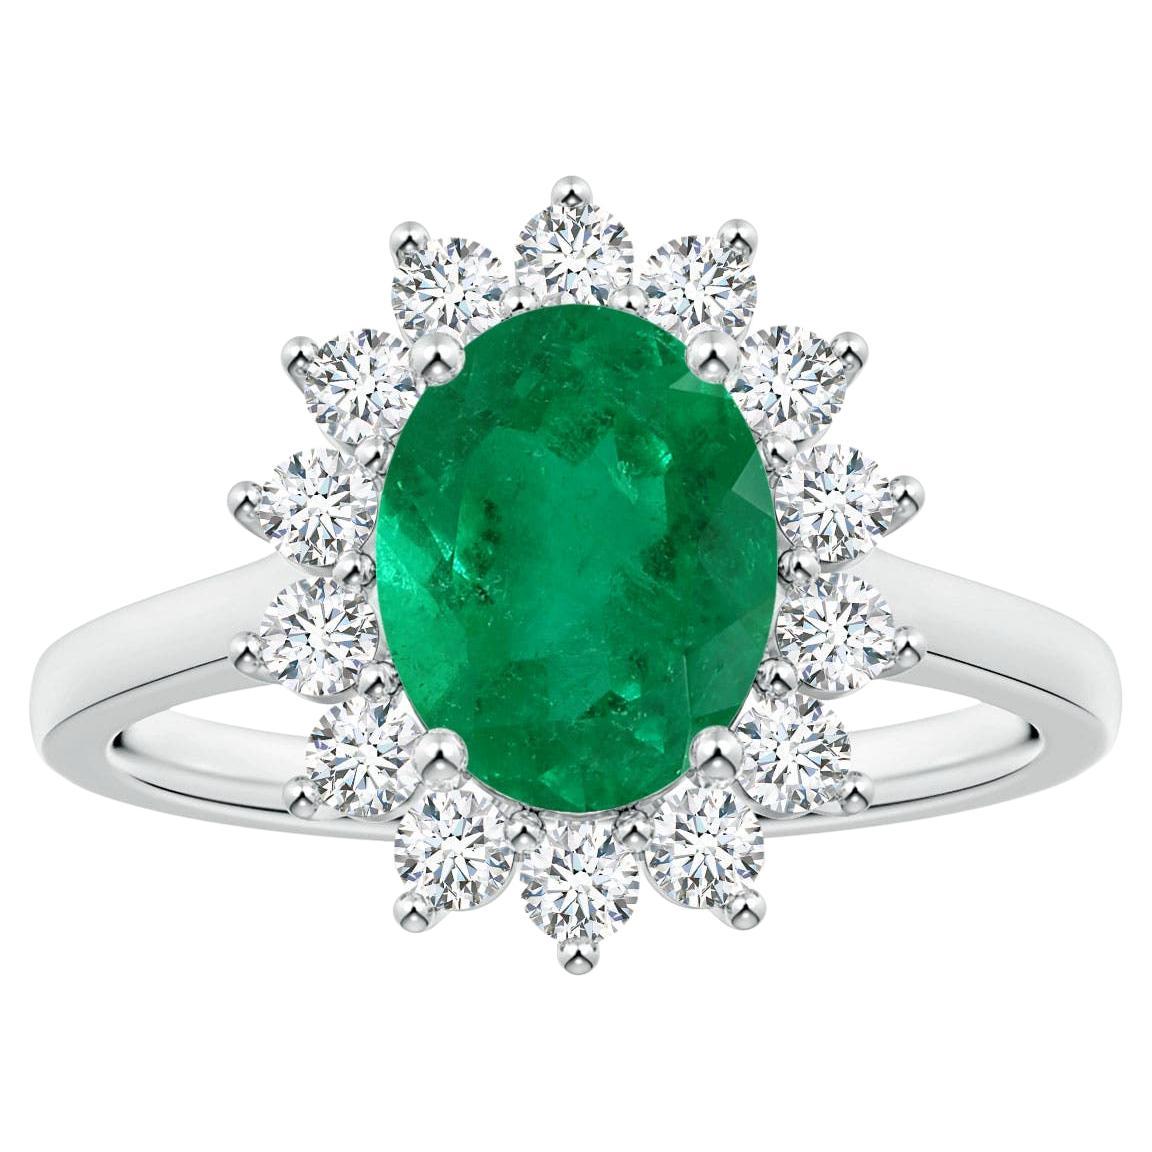 For Sale:  Angara Gia Certified Oval Columbian Emerald Halo Ring in White Gold